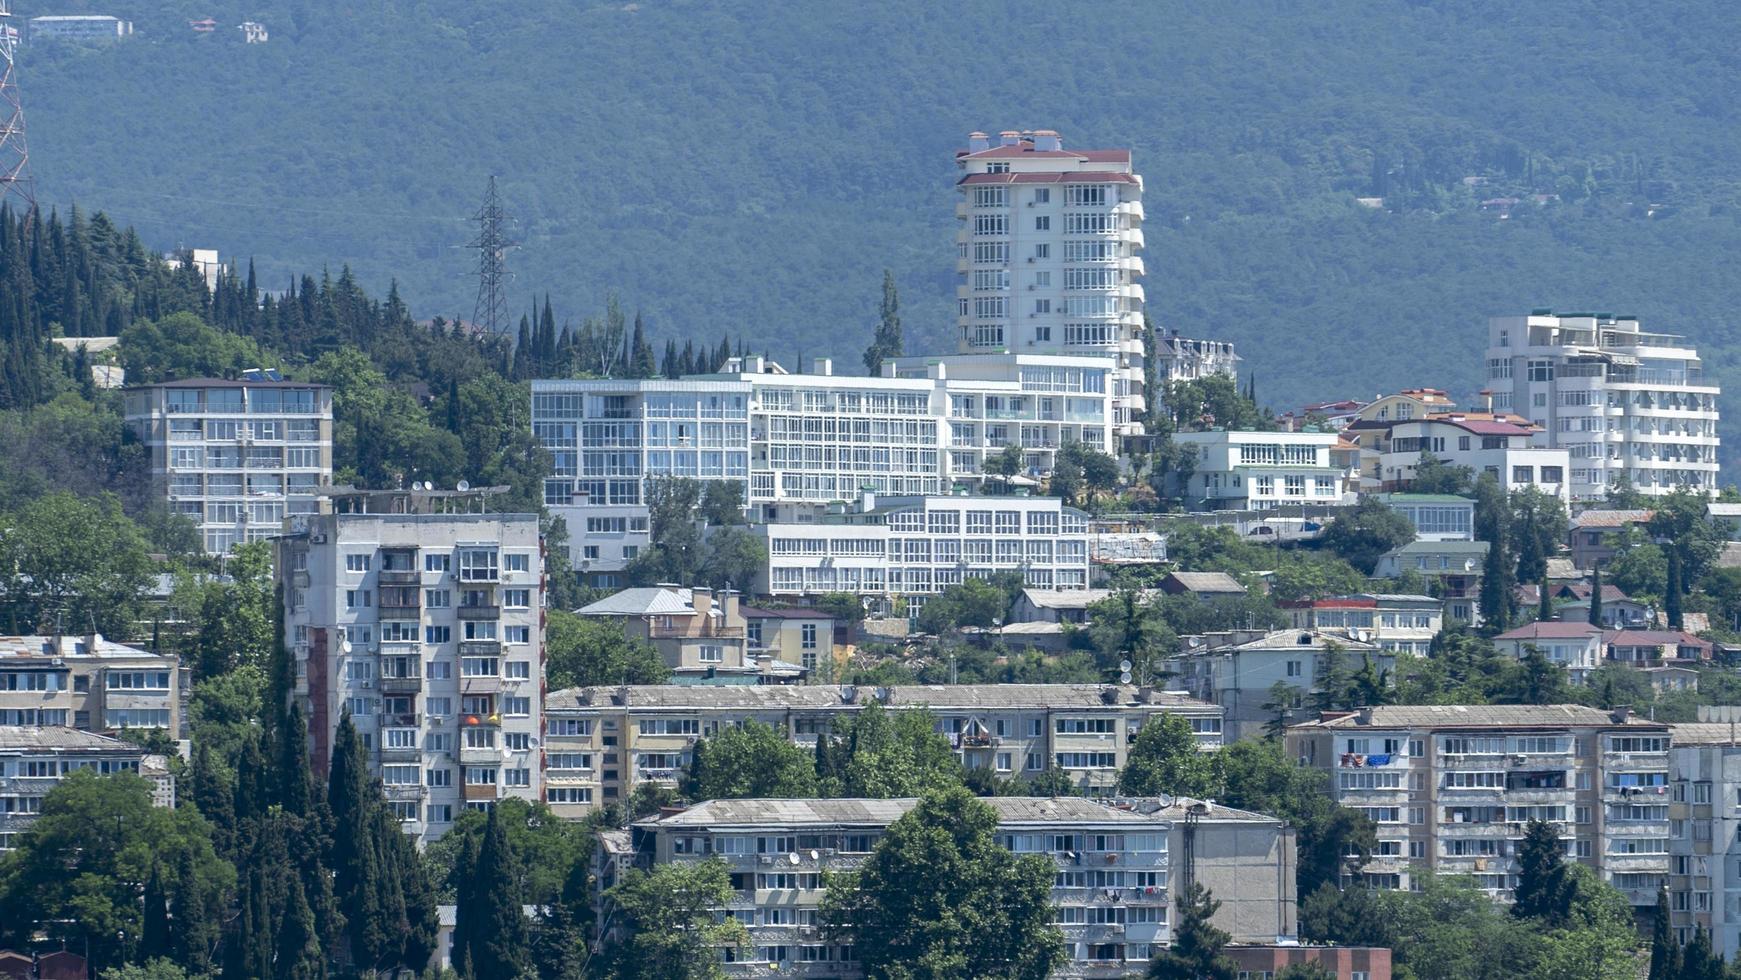 Urban landscape with buildings and architecture. Yalta photo